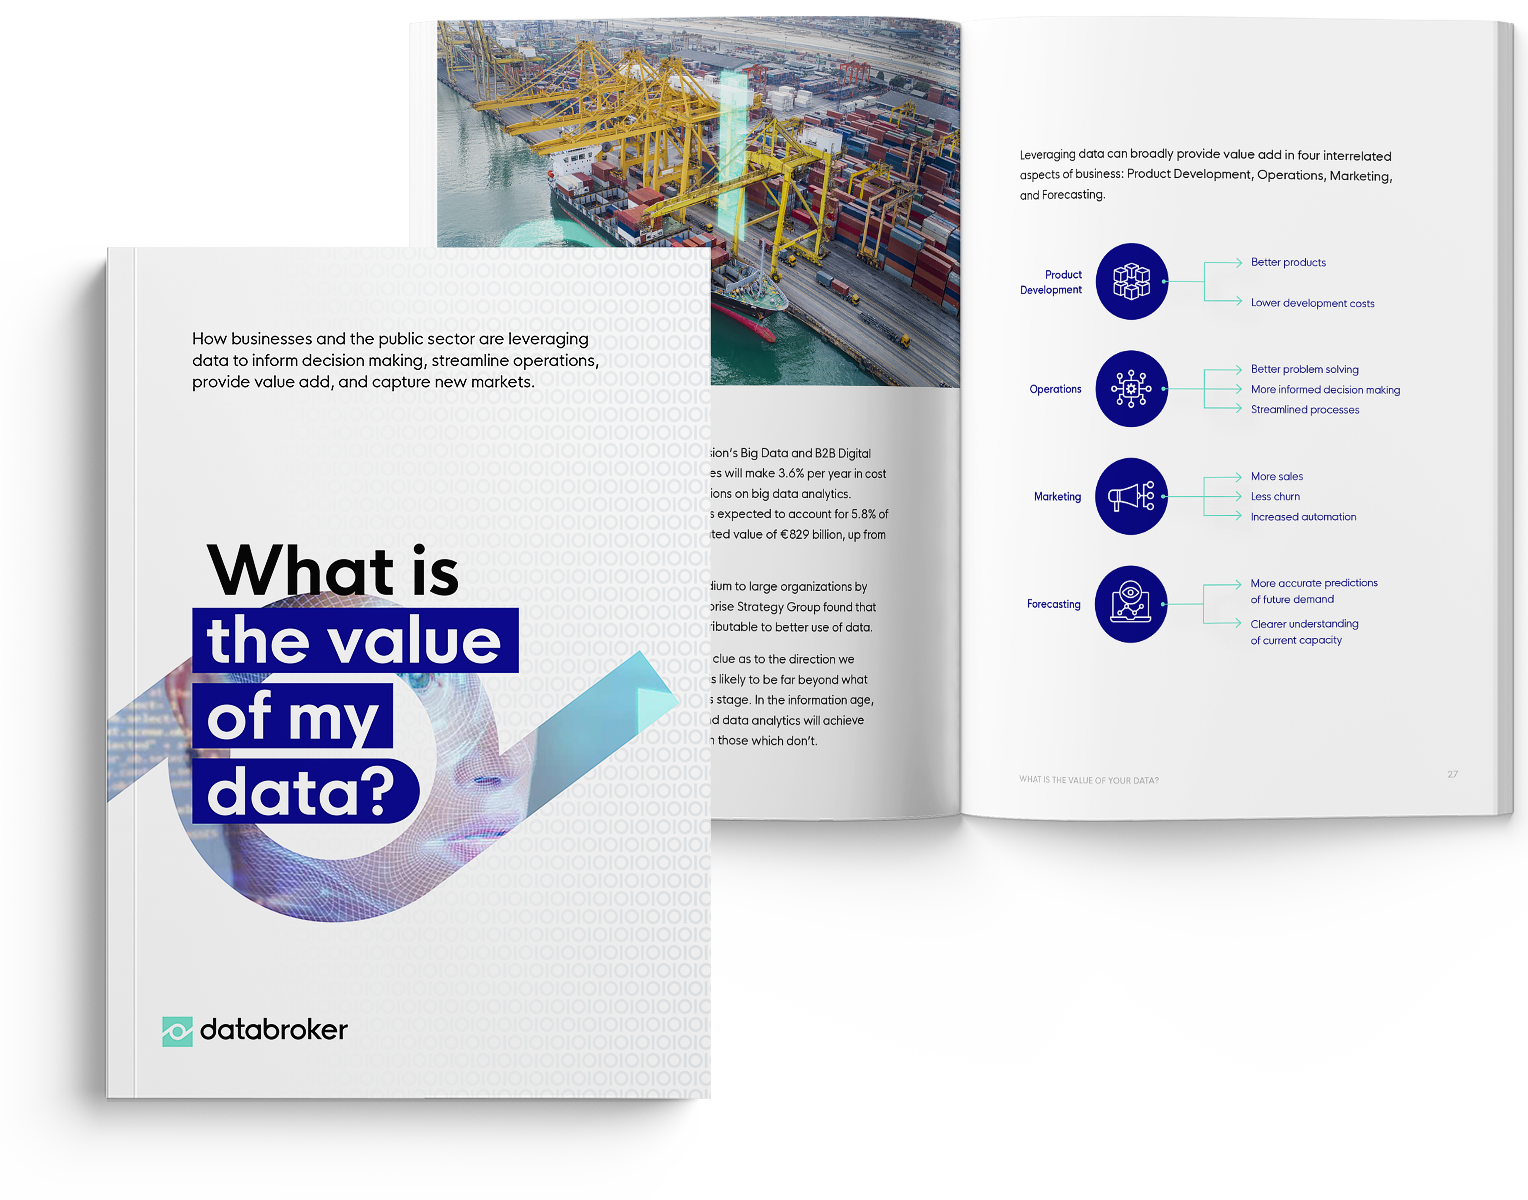 "What is the value of your data?" - the Databroker eBook